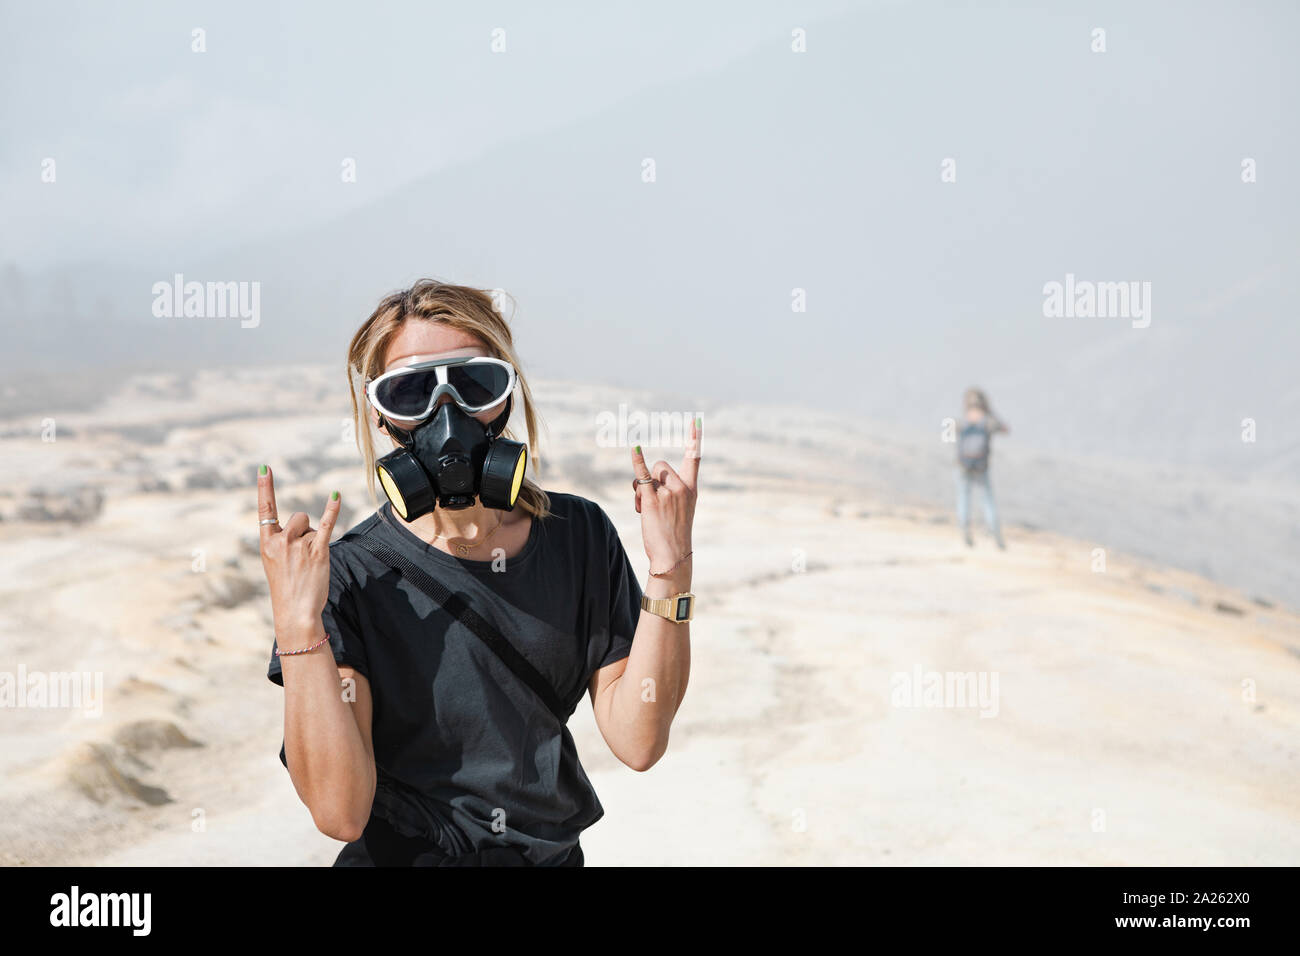 Young women in protective mask walking by wastelands around Kawah Ijen volcano crater. Post apocalypse landscape, clouds of toxic gases from volcano Stock Photo